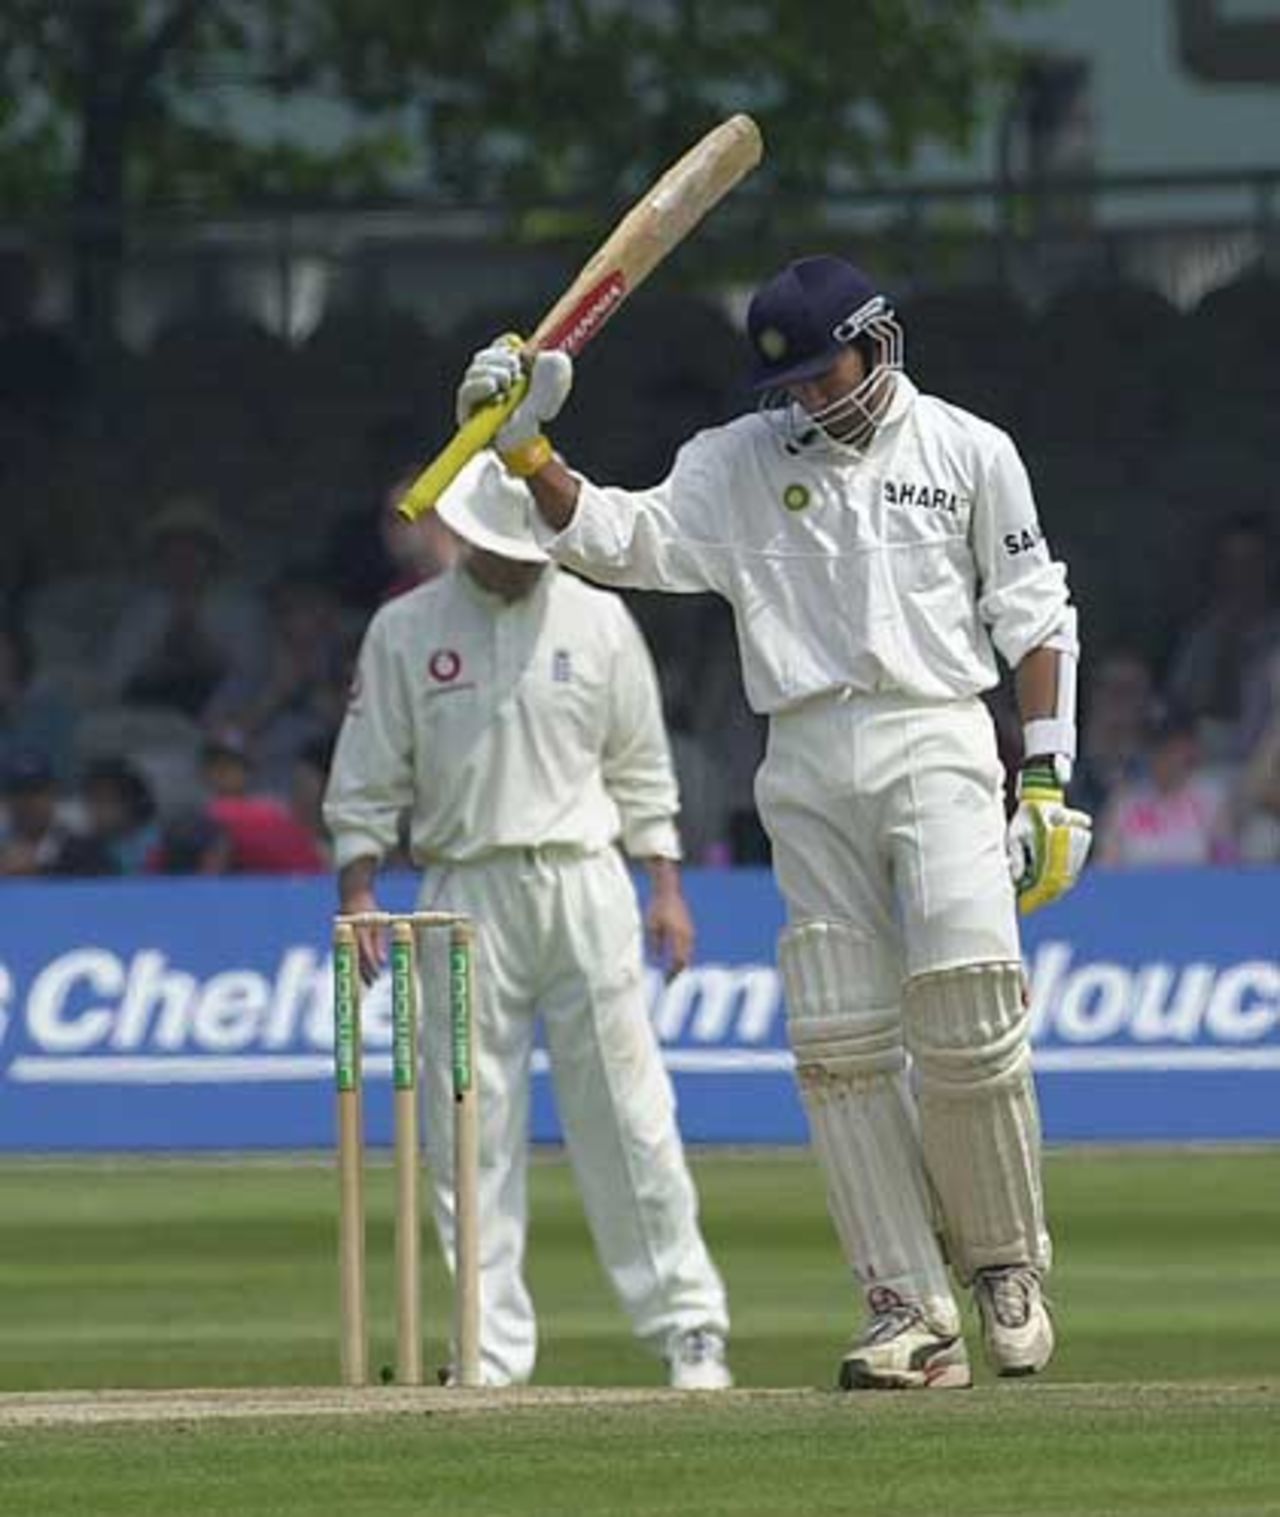 Ajit Agarkar acknowledges his maiden Test 50, England v India 1st npower Test at Lord's